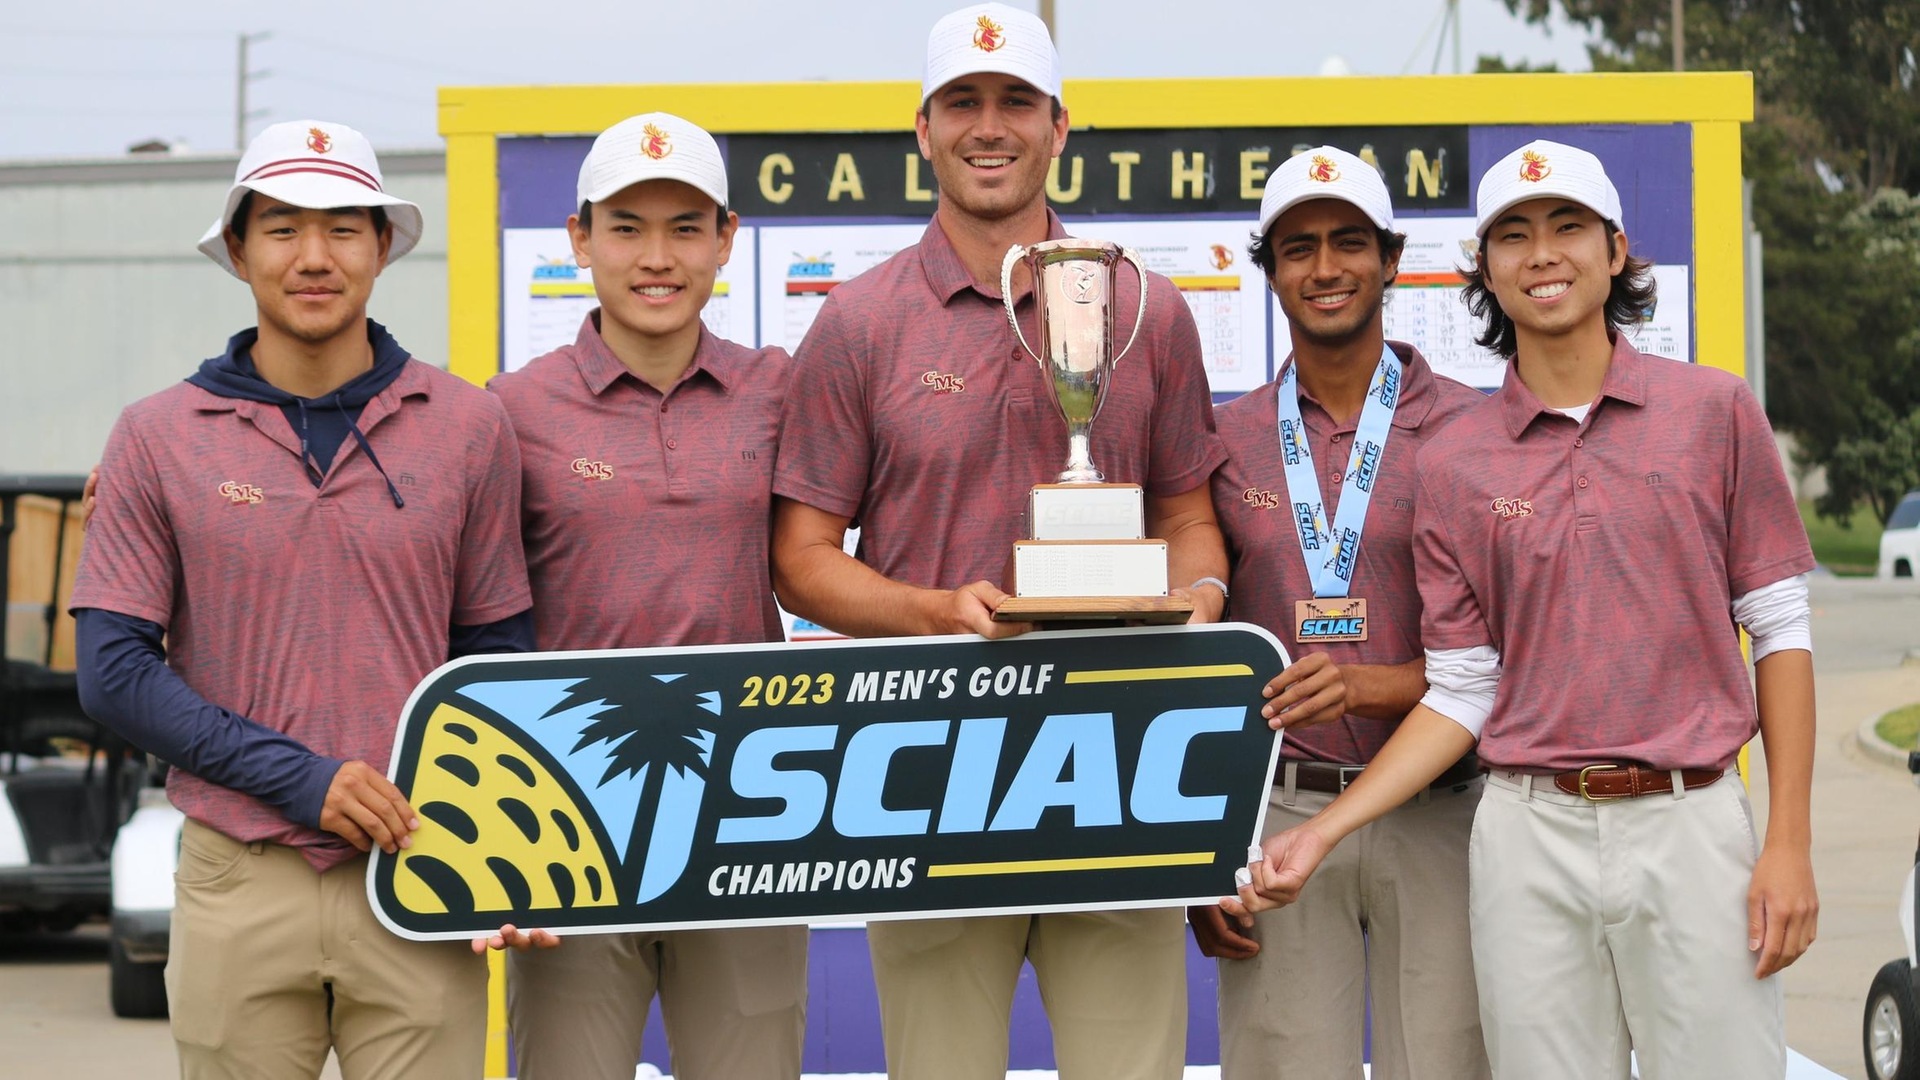 The Stags earned their second straight SCIAC title